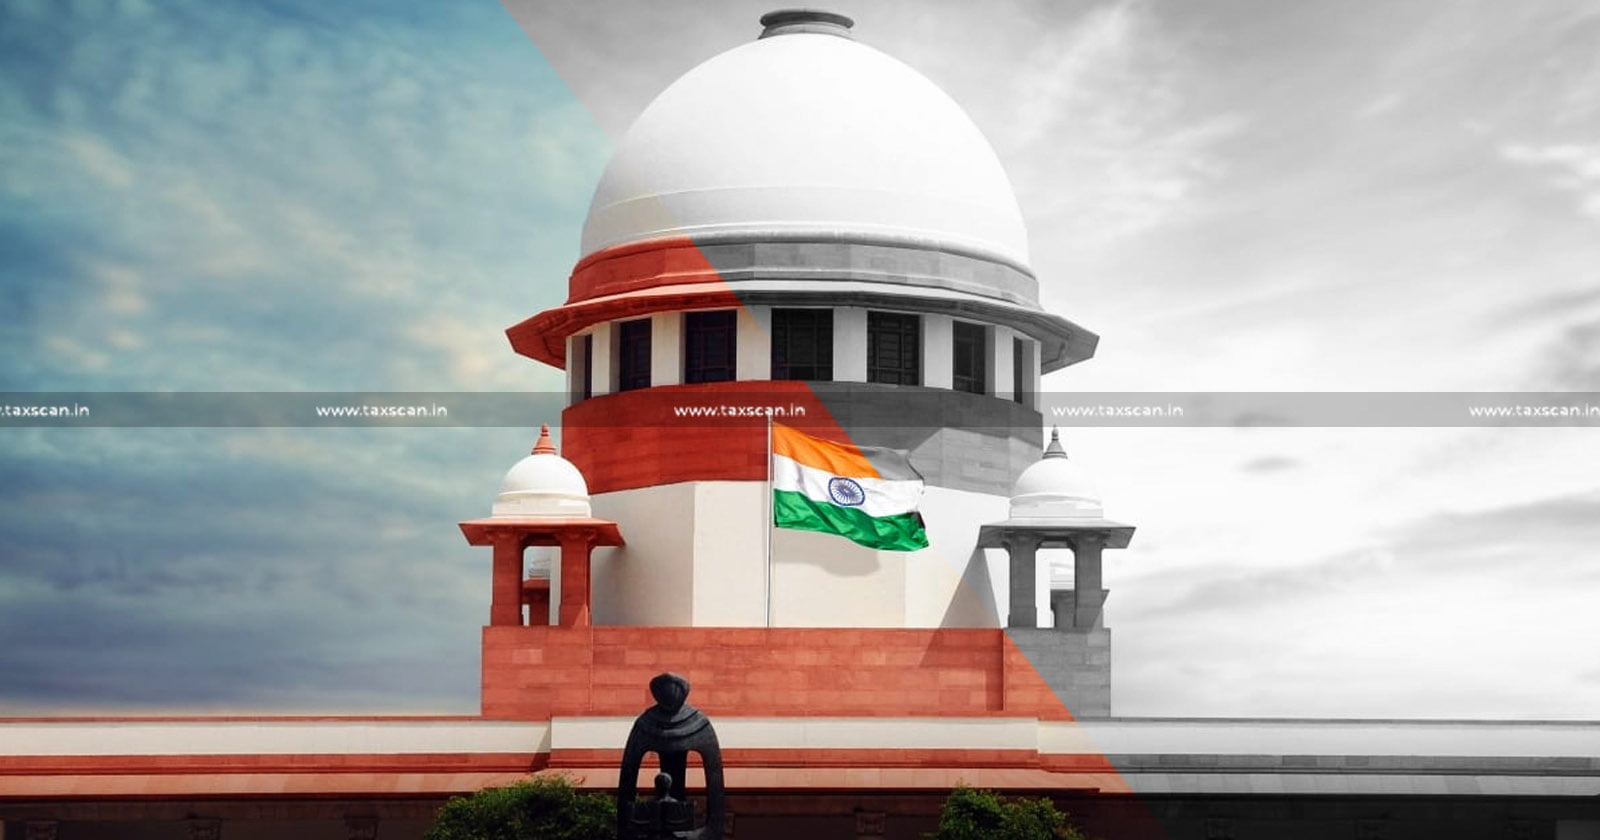 Goods - Sold - Assessee - Related Person - Excise Act - Test is Erroneous - SC - Supreme Court - Taxscan